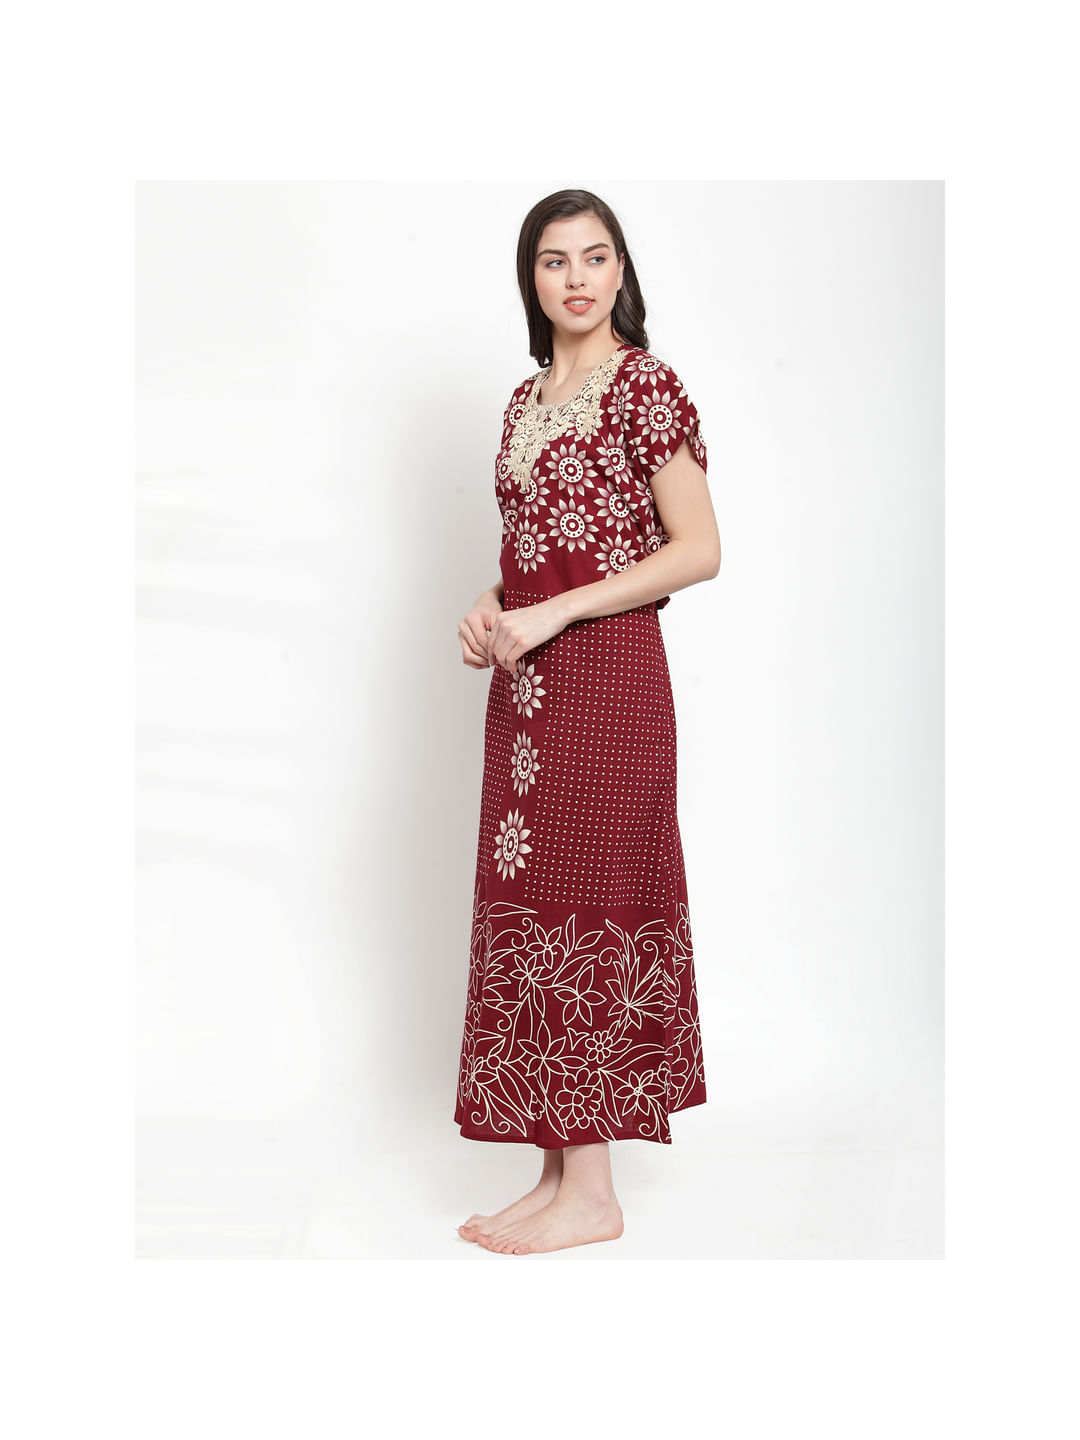 Cotton Maroon Printed Nighty (Free Size)